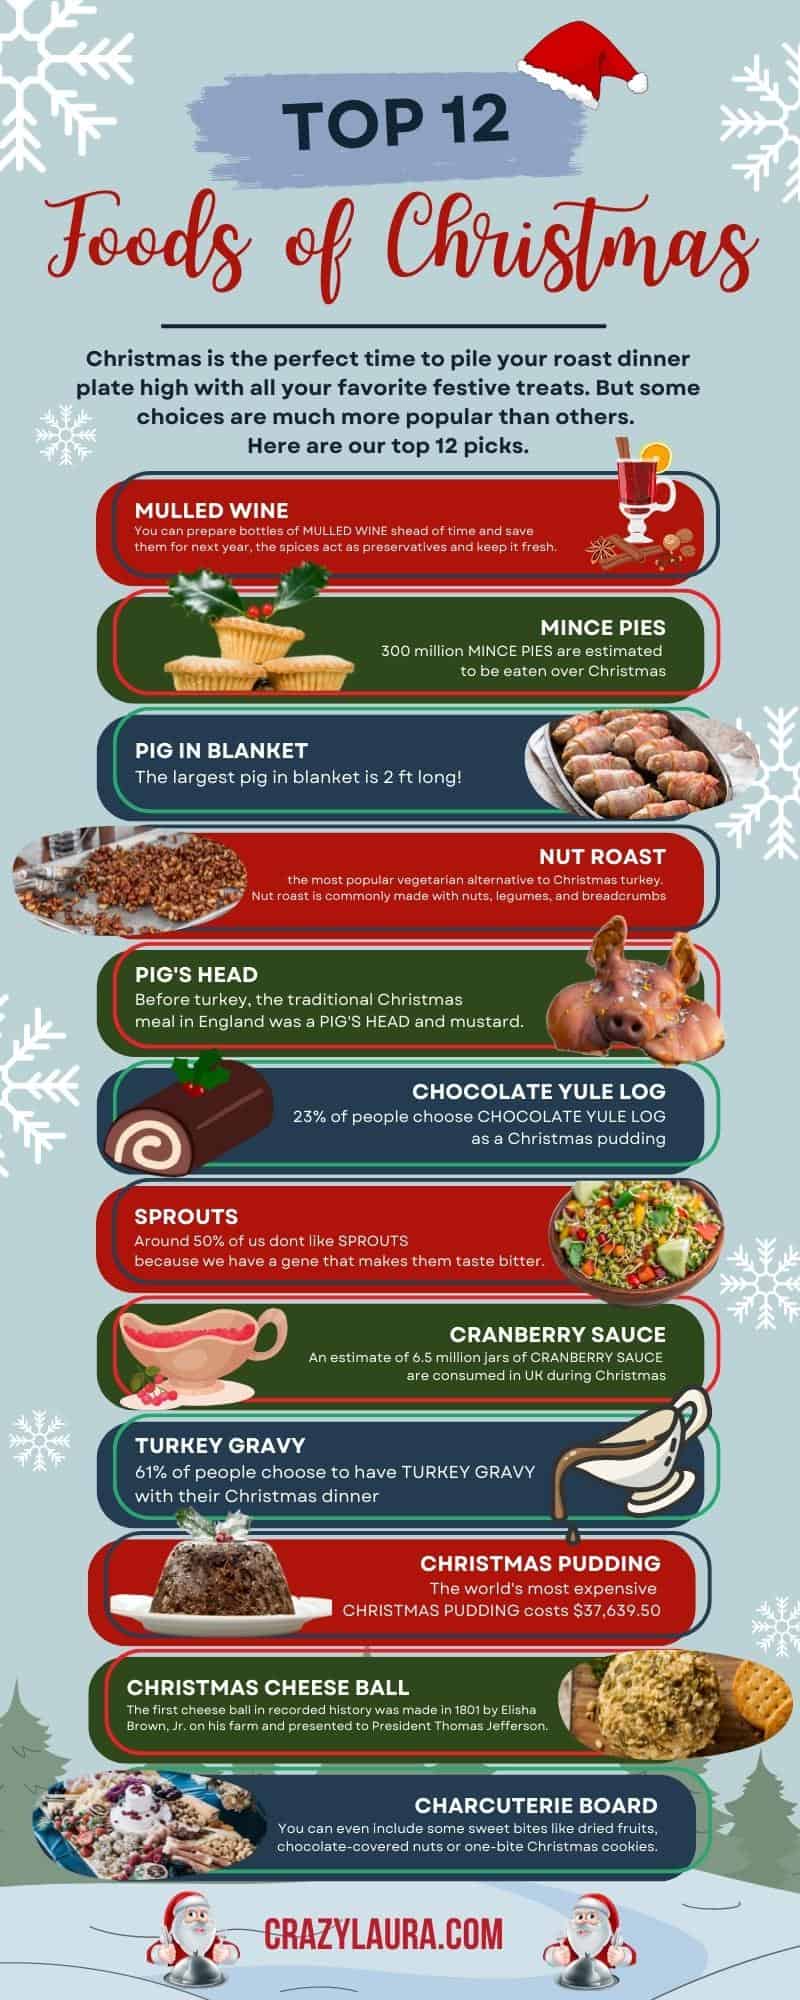 Top 12 Foods of Christmas Blue And Red Illustration Infographic - CrazyLaura